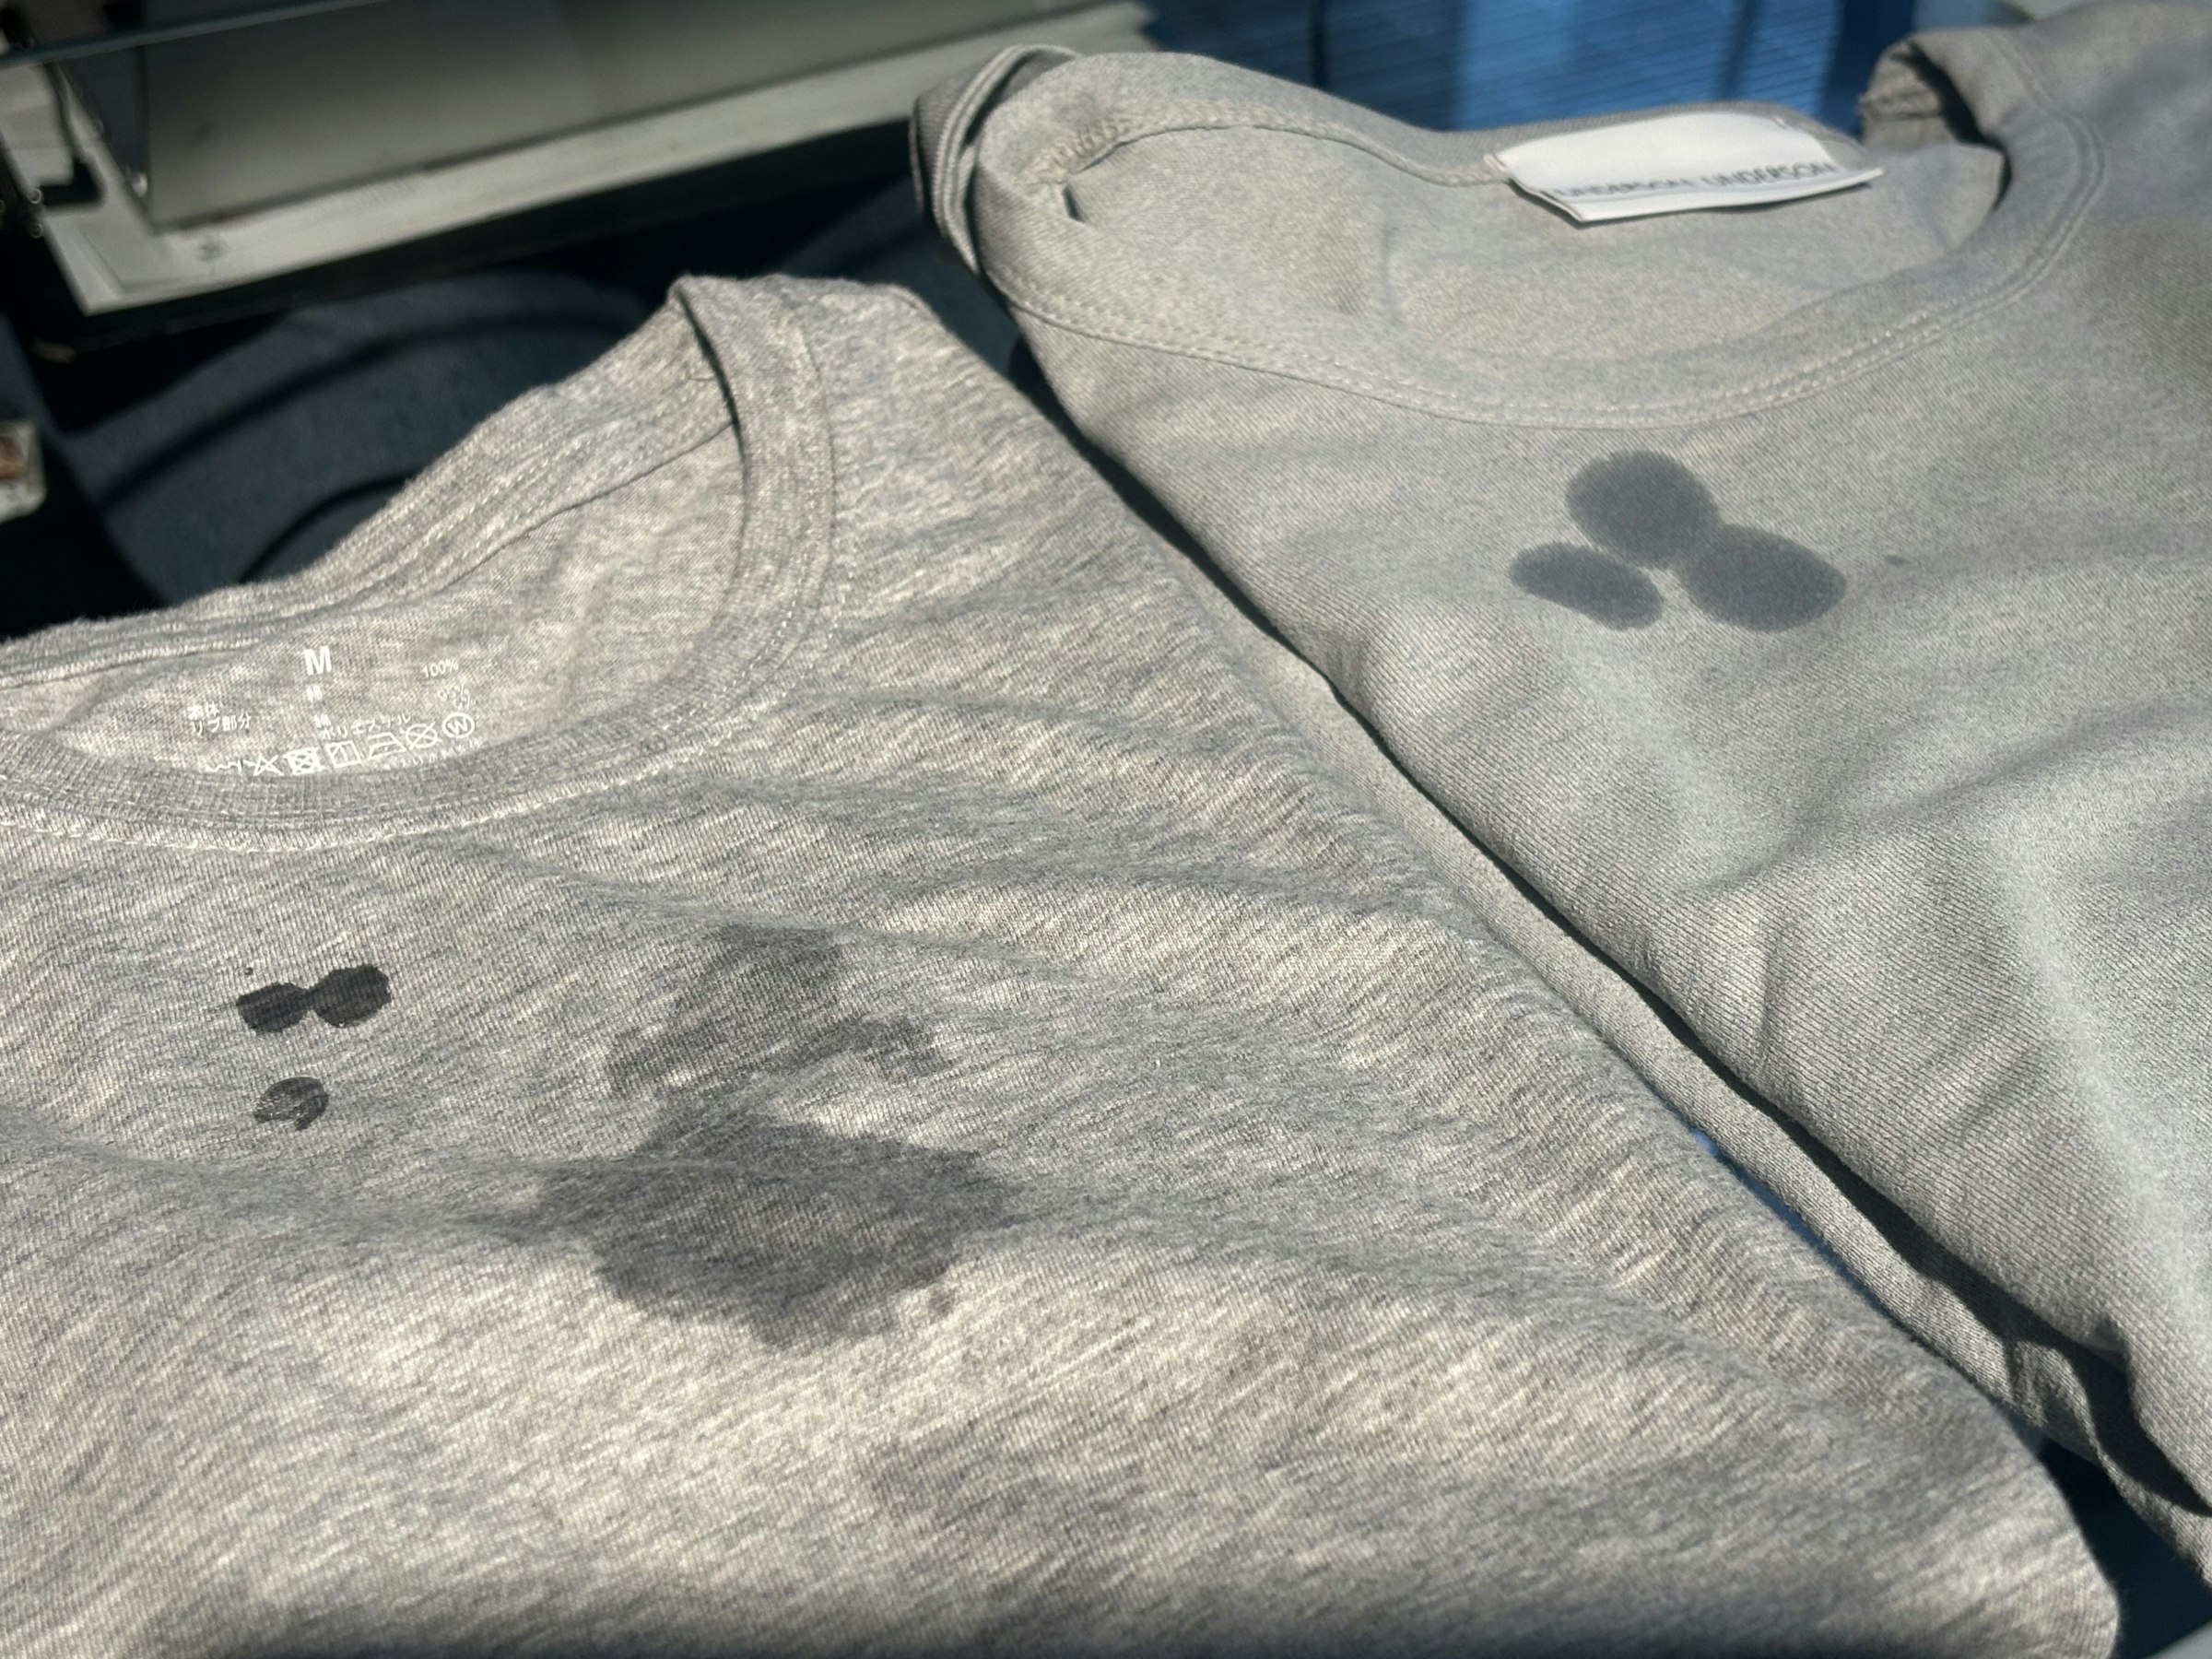 On the left is a cotton t-shirt, on the right is a WASHIFABRIC® t-shirt